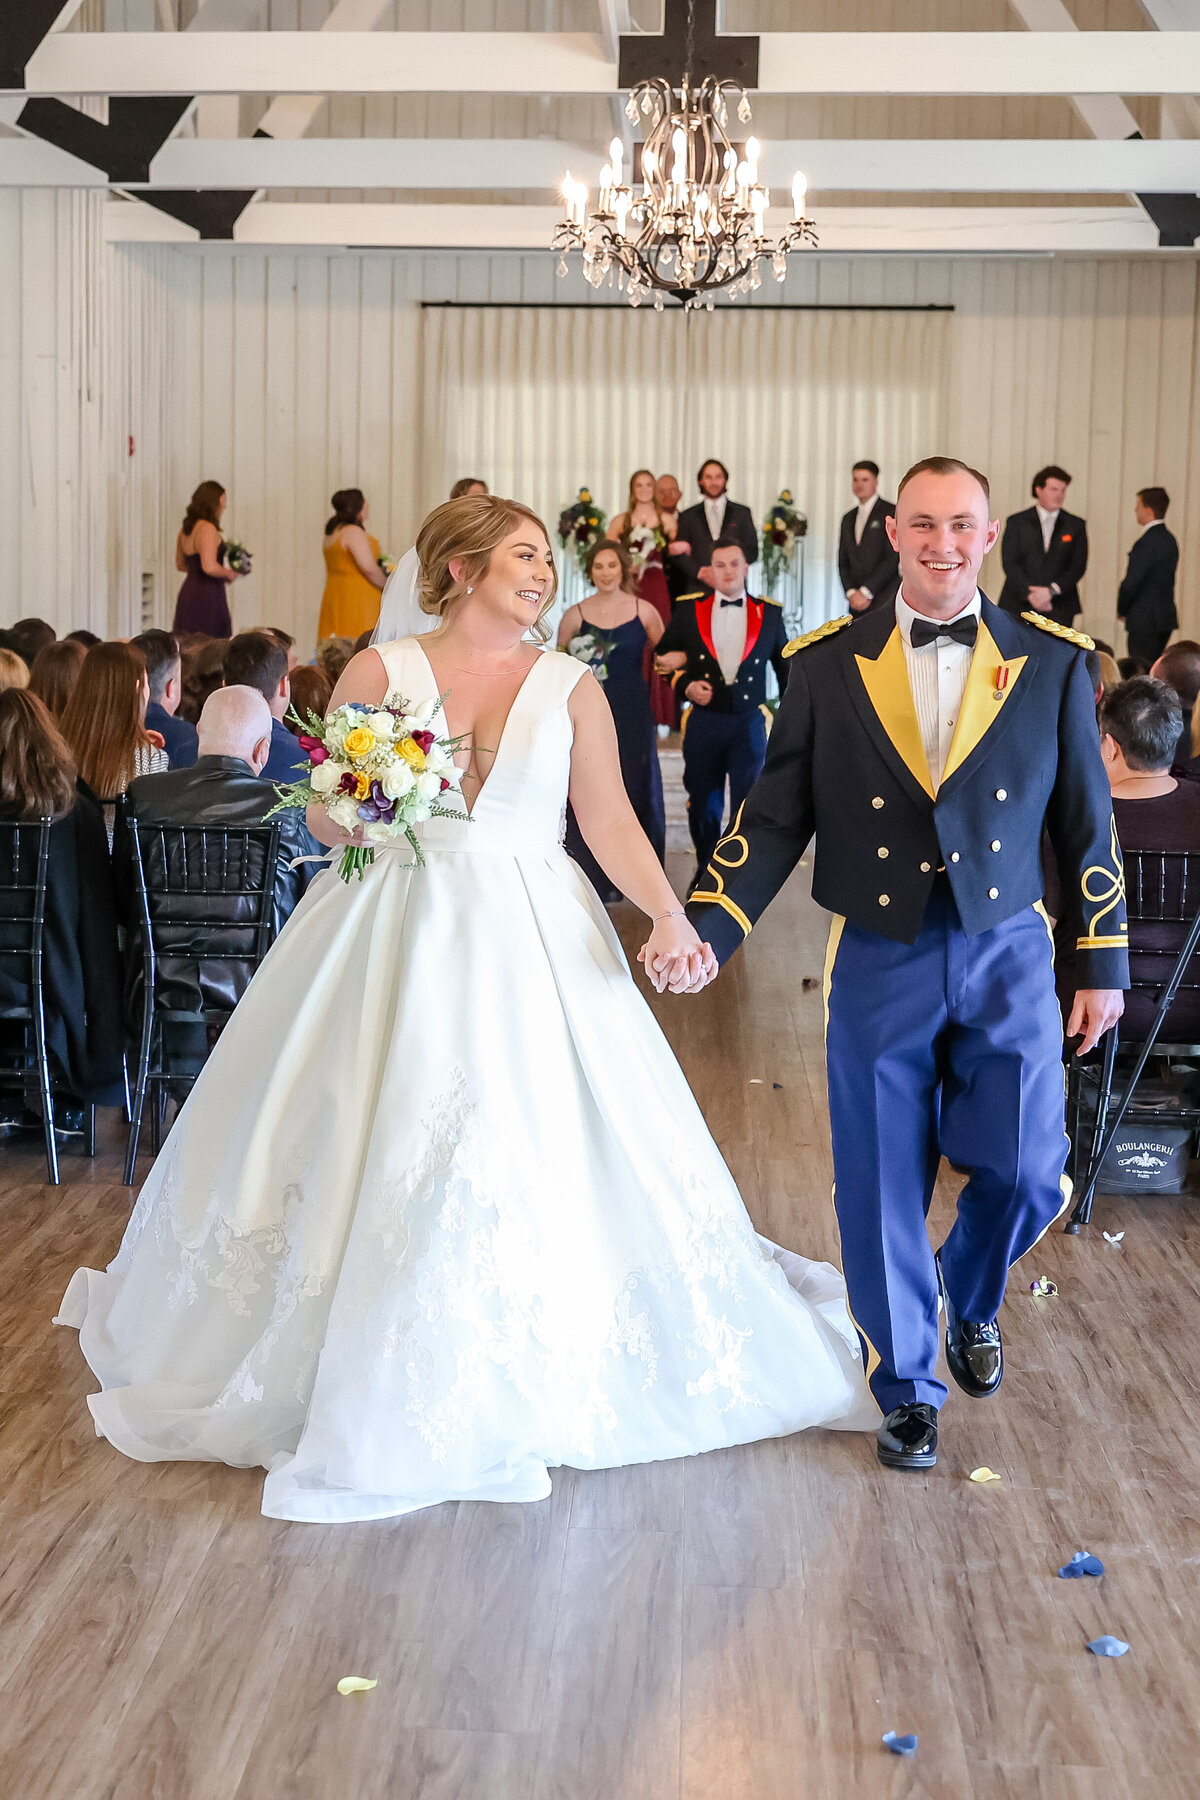 Aggie bride and groom walk from alter toward photographer  at Military wedding in Georgetown Texas